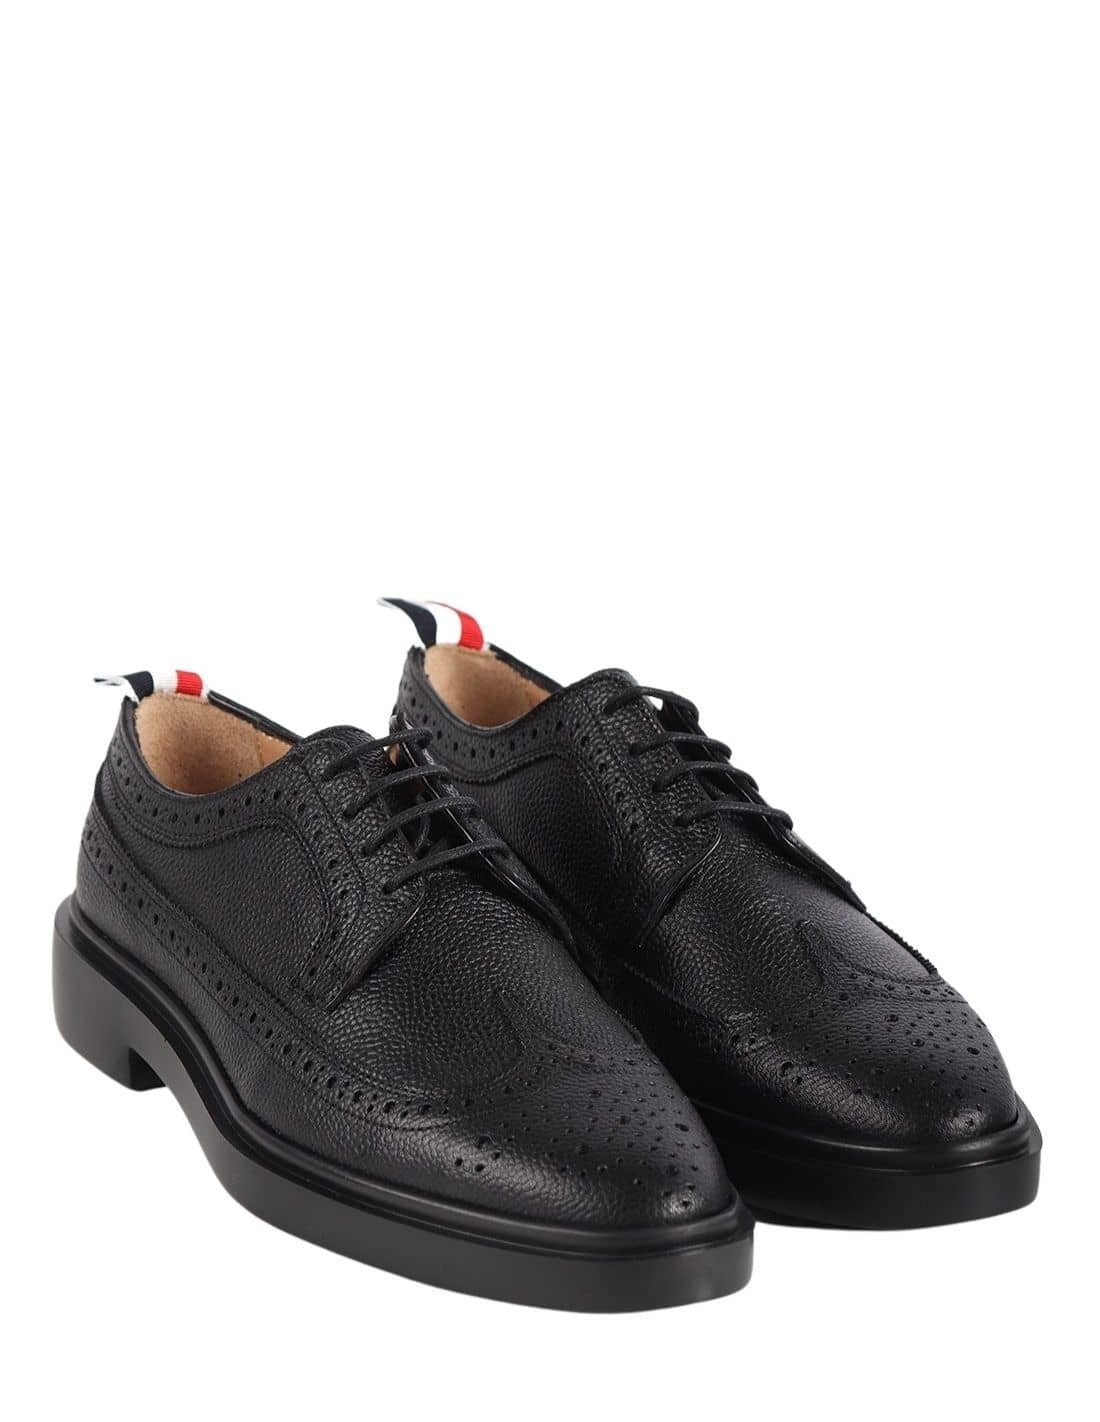 Black derby in full grain leather from the THOM BROWNE